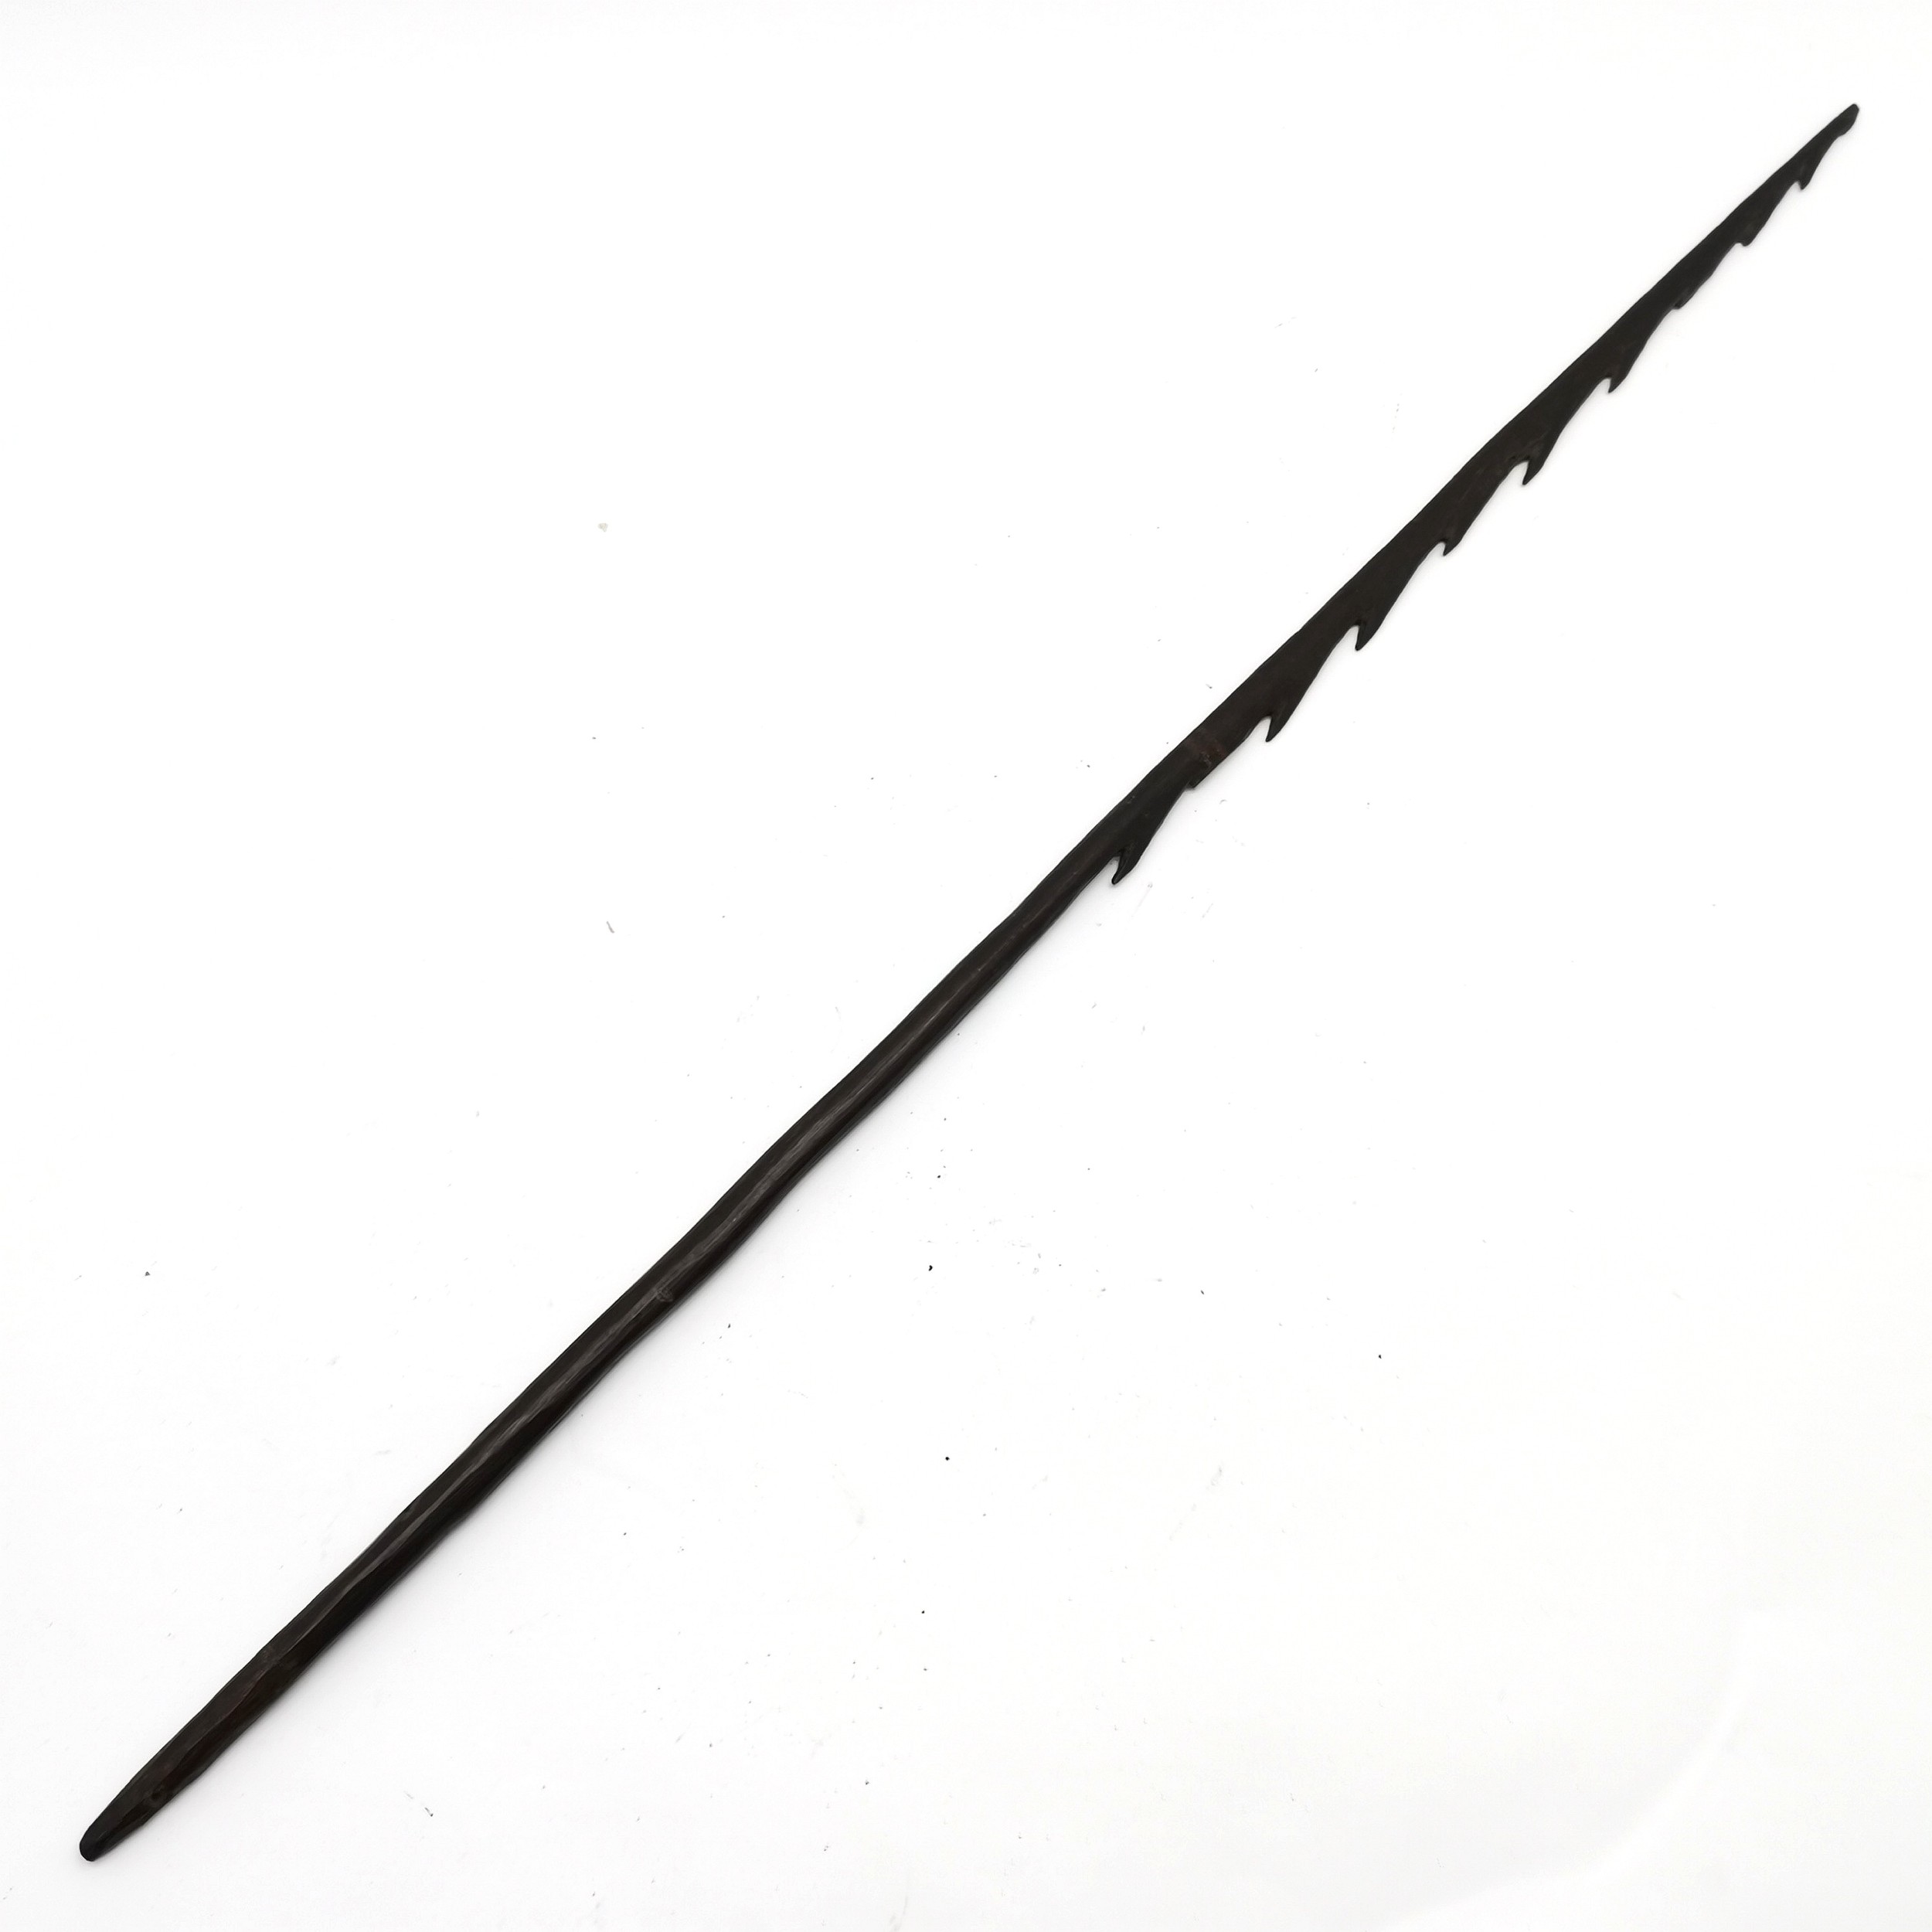 Antique ethnic wooden fishing spear with barbed detail - has losses - 92cm long.